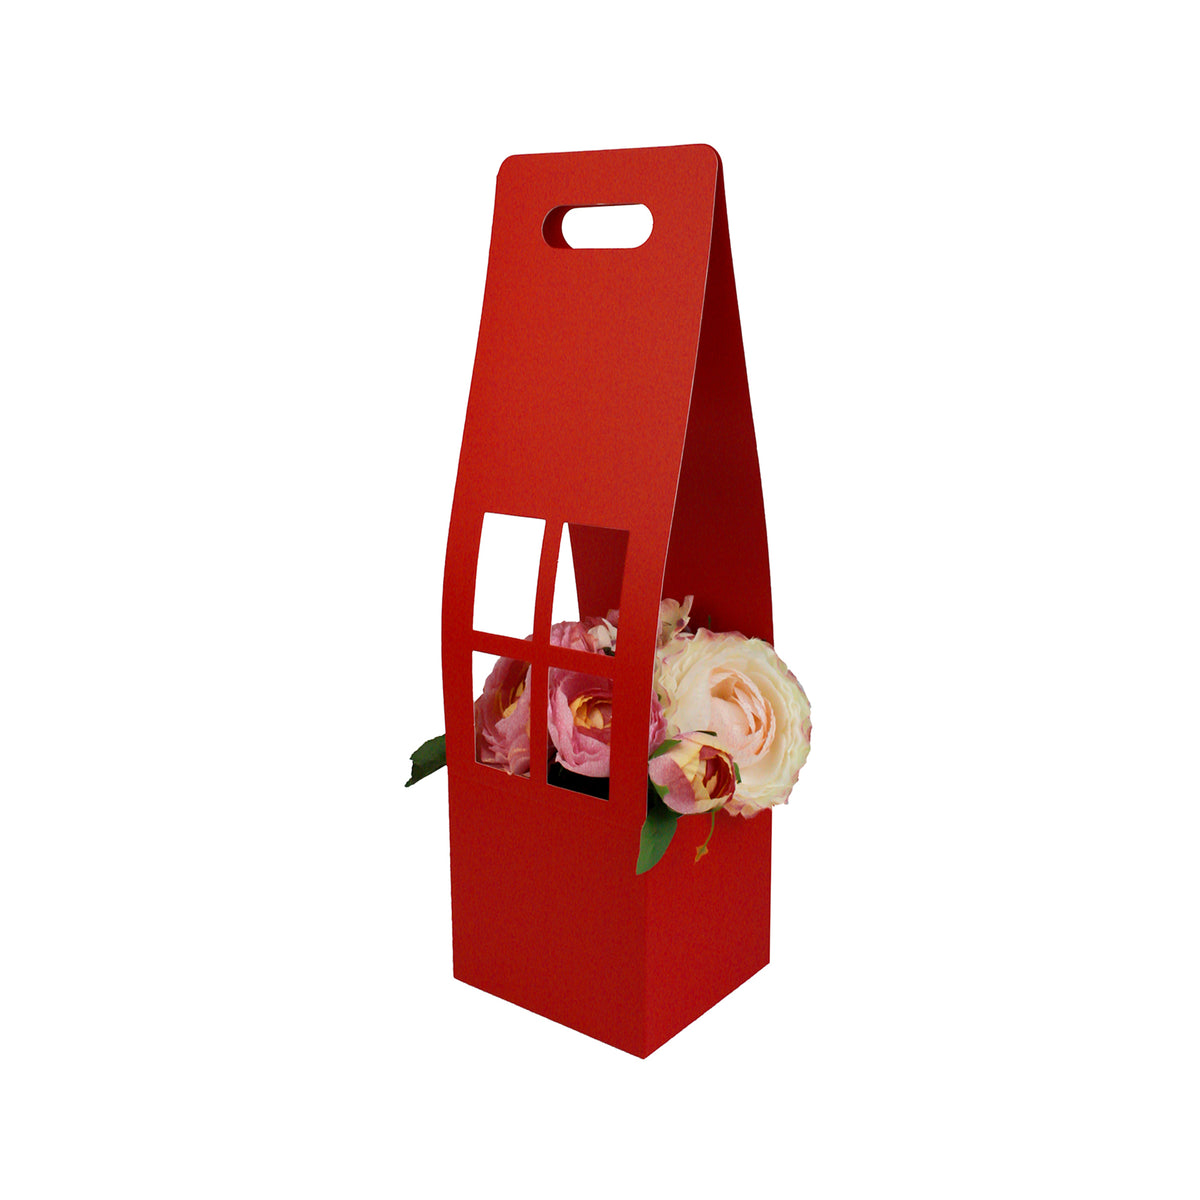 Red Flower/Plant Carrier Boxes (Pack of 12)